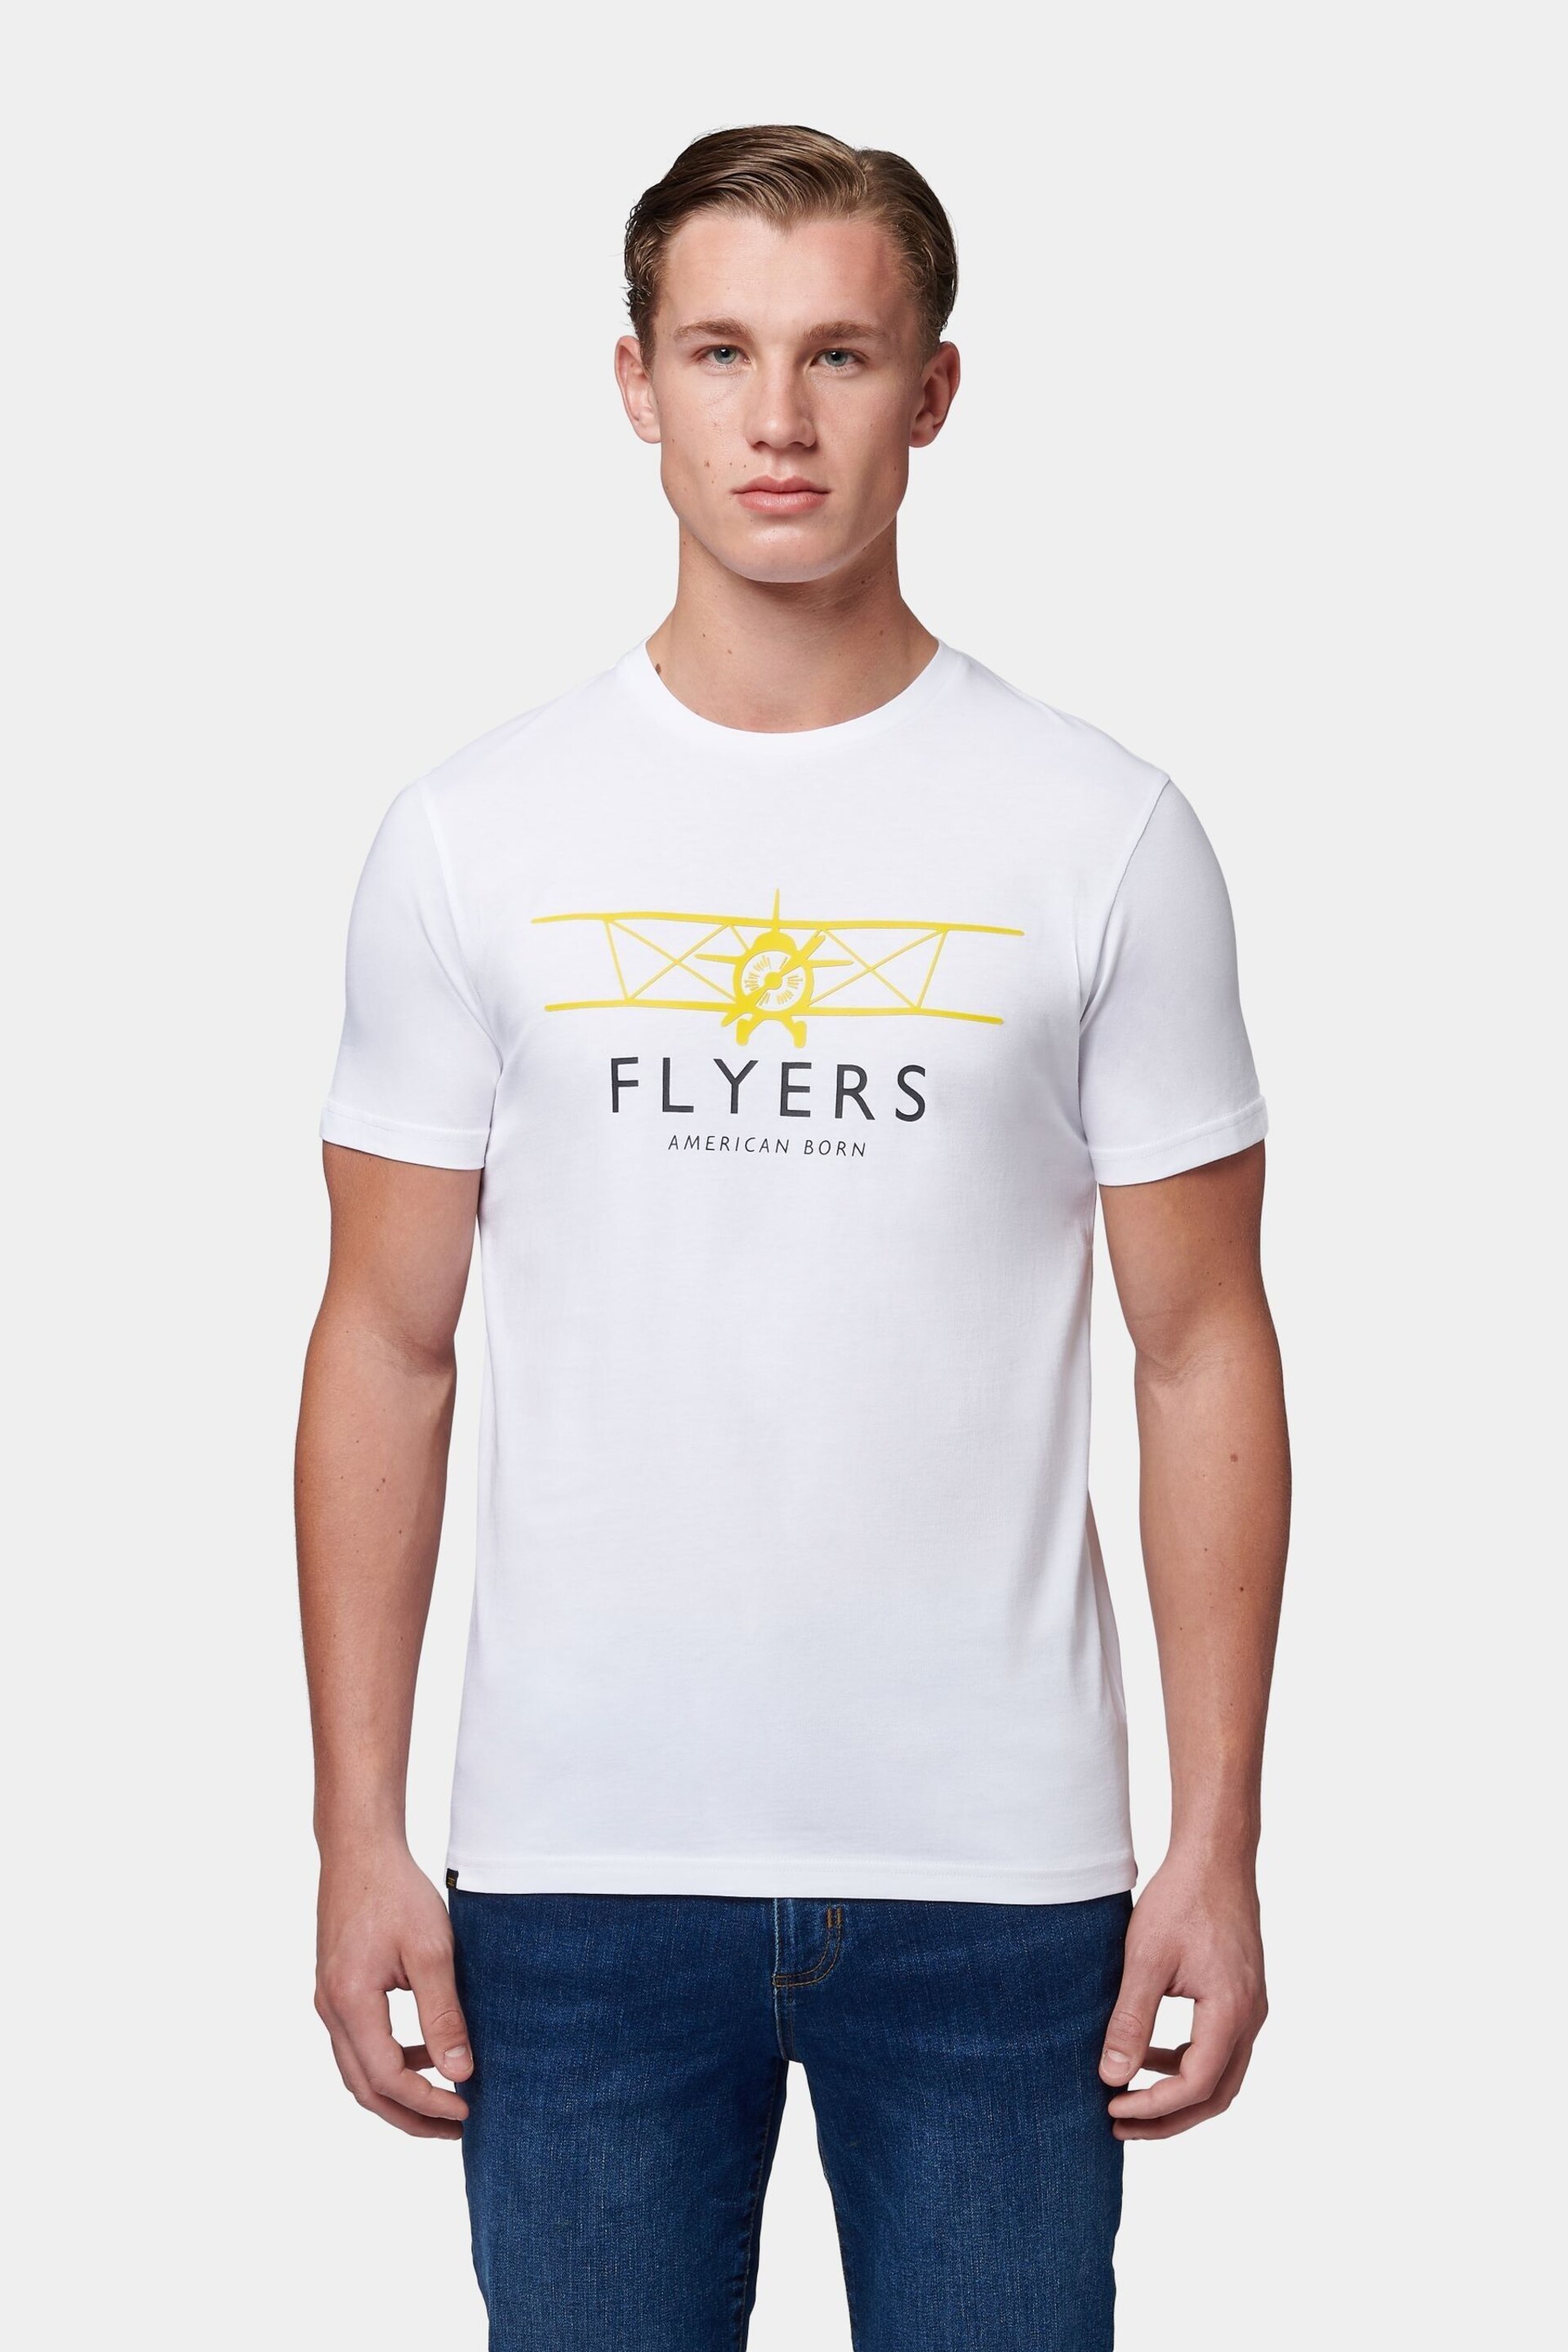 Flyers Mens Classic Fit Plane T-Shirt - Image 1 of 8